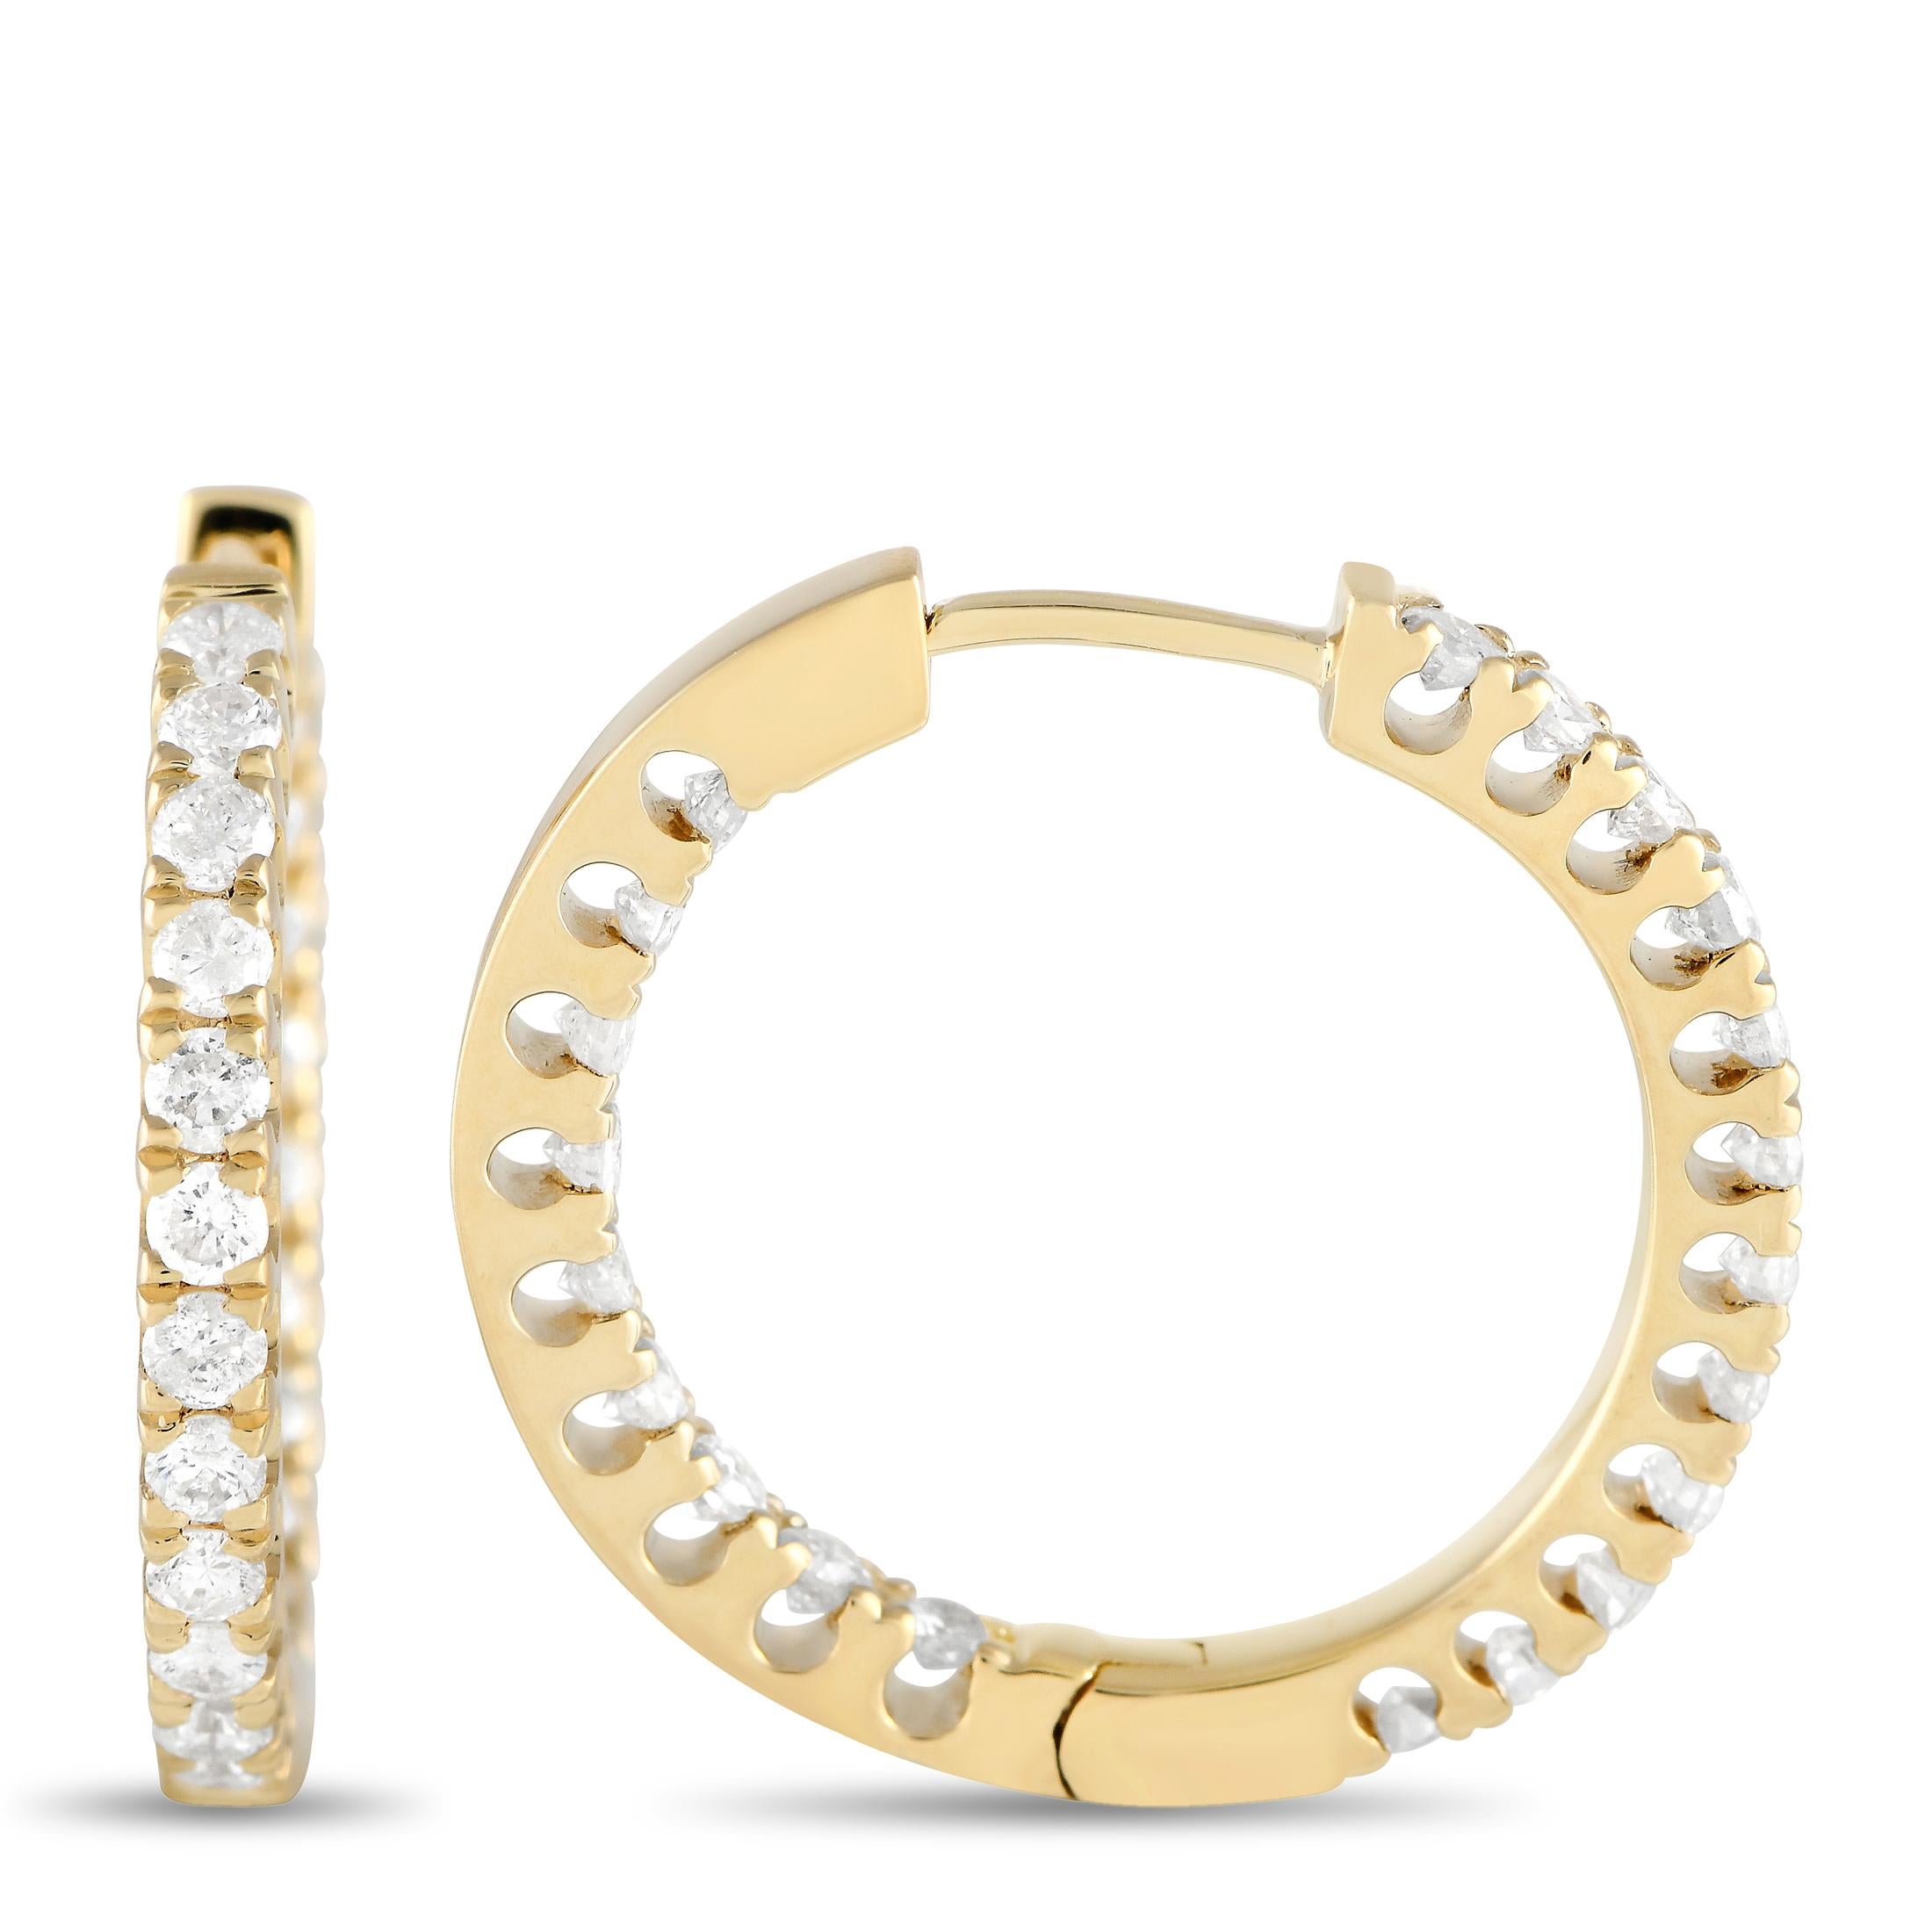 These impeccably crafted hoop earrings will sparkle and shine from any angle. Diamonds totaling 1.0 carats shine brightly from their place within the opulent 14K Yellow Gold setting, which measures 0.75” round.  

This jewelry piece is offered in